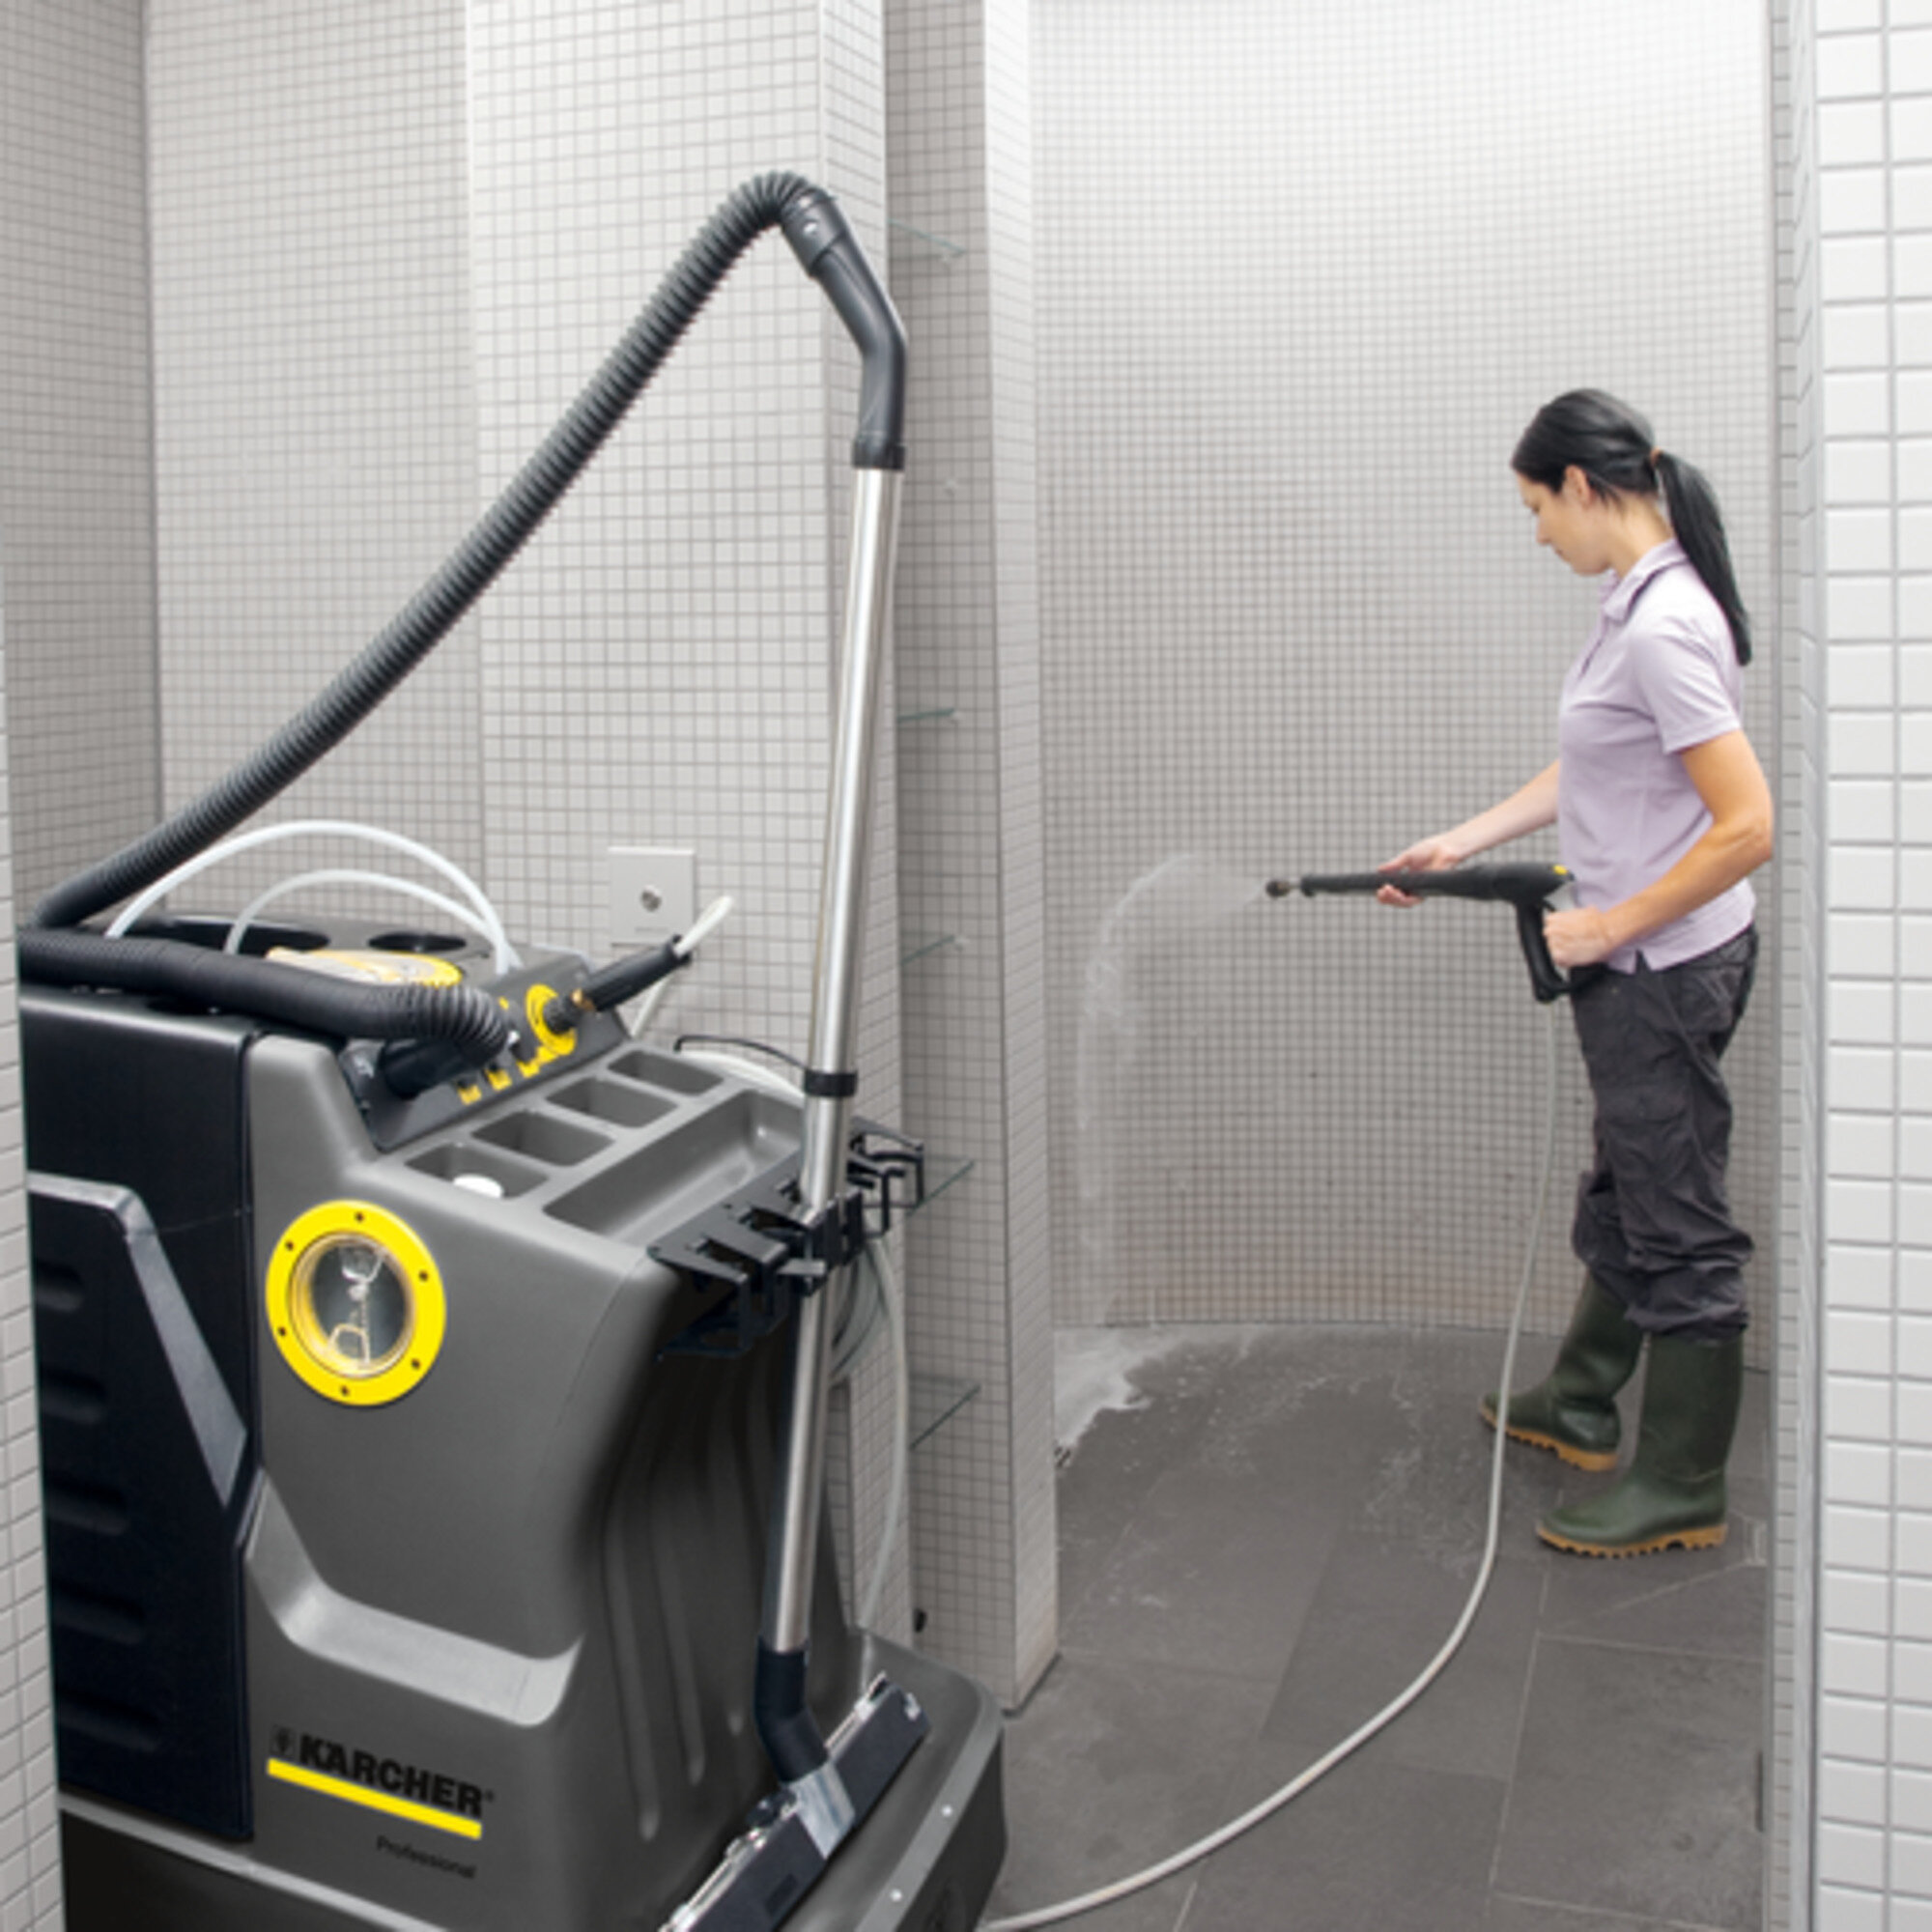 High pressure washer AP 100/50 M: Cleaning with high pressure